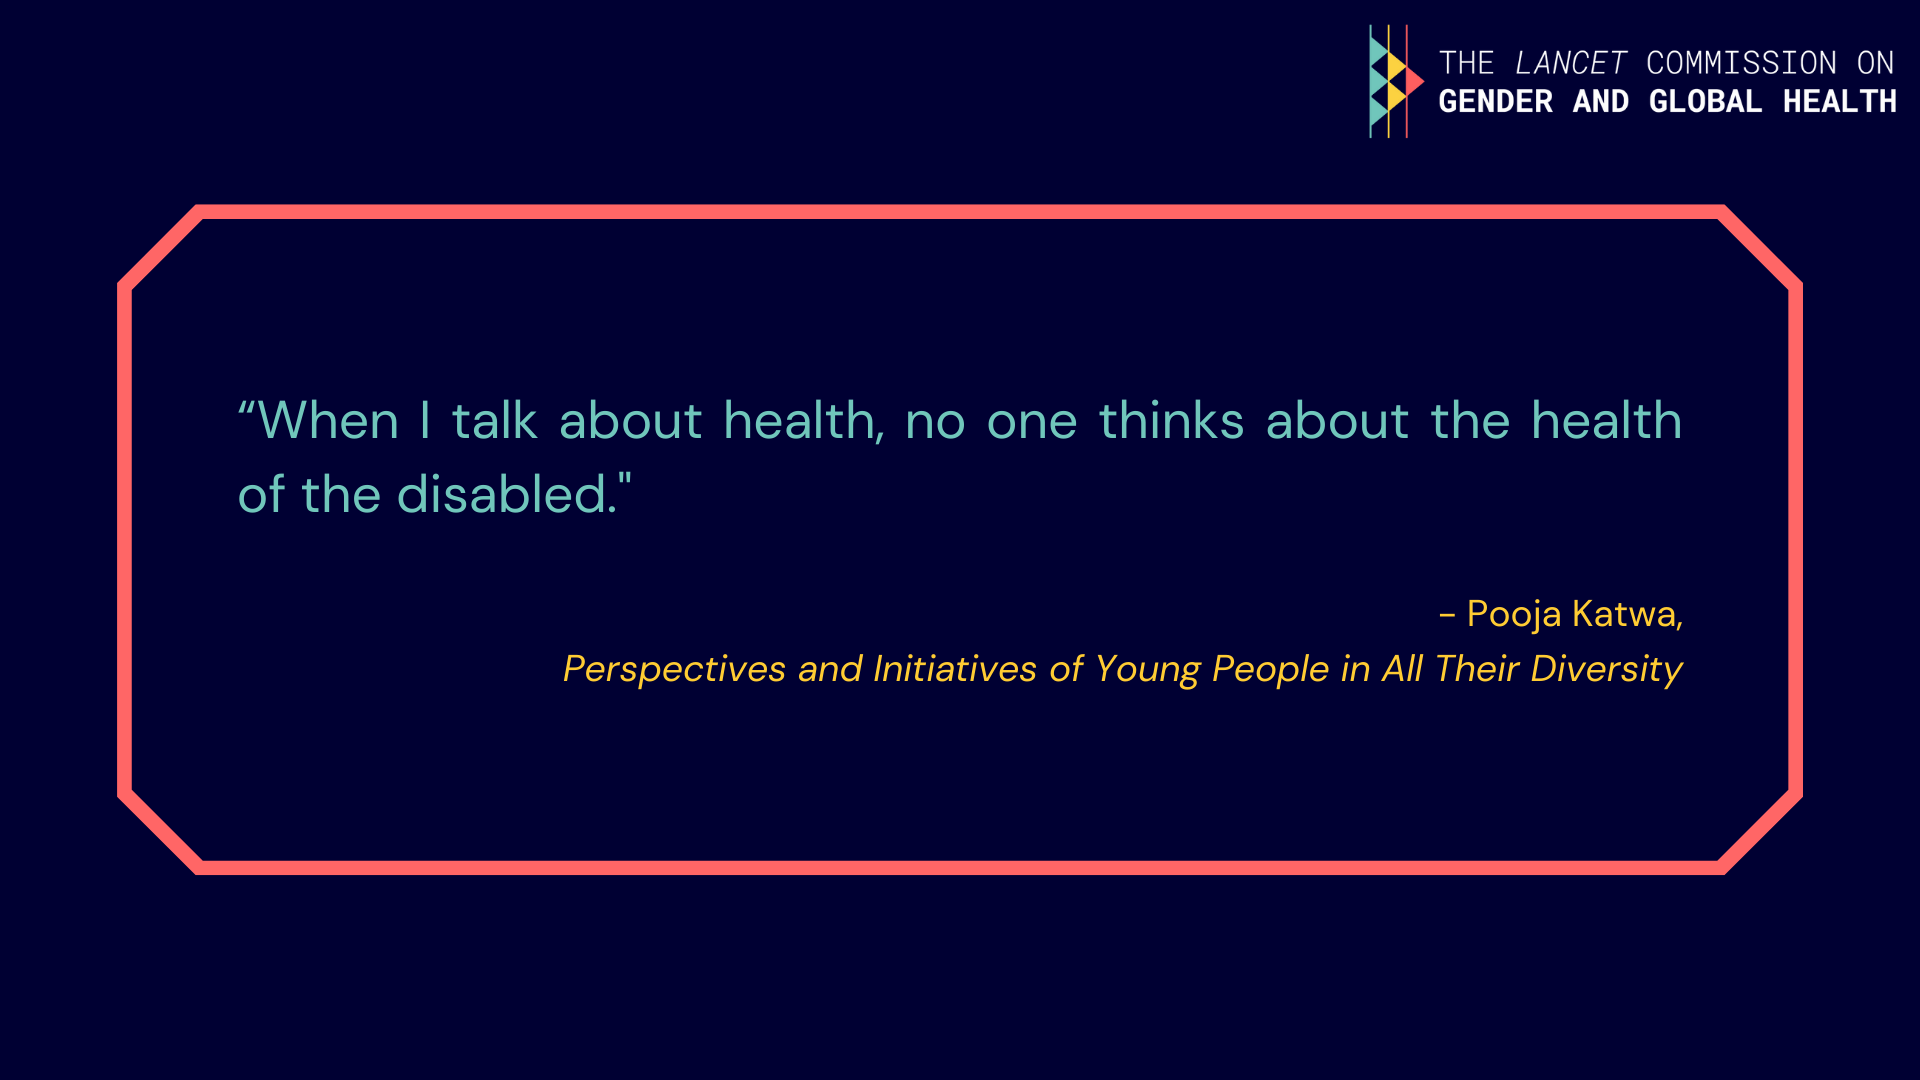 Quote from Pooja Katwa: "When I talk about health, no one thinks about the health of the disabled".